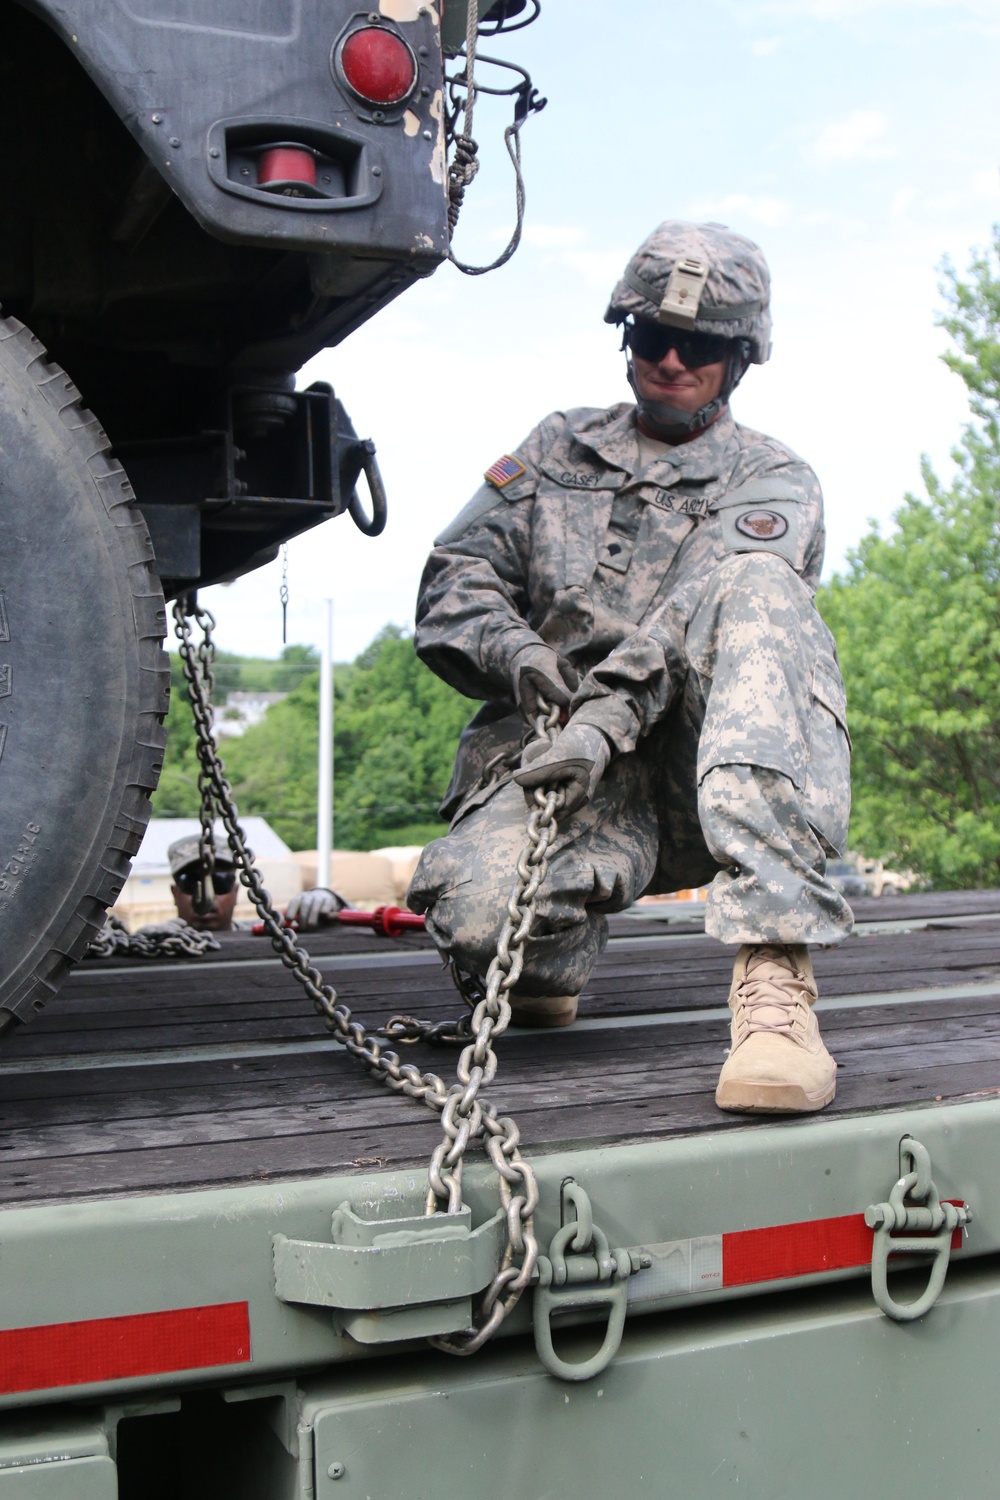 Nationwide Move 15 gives Reservists experience, confidence